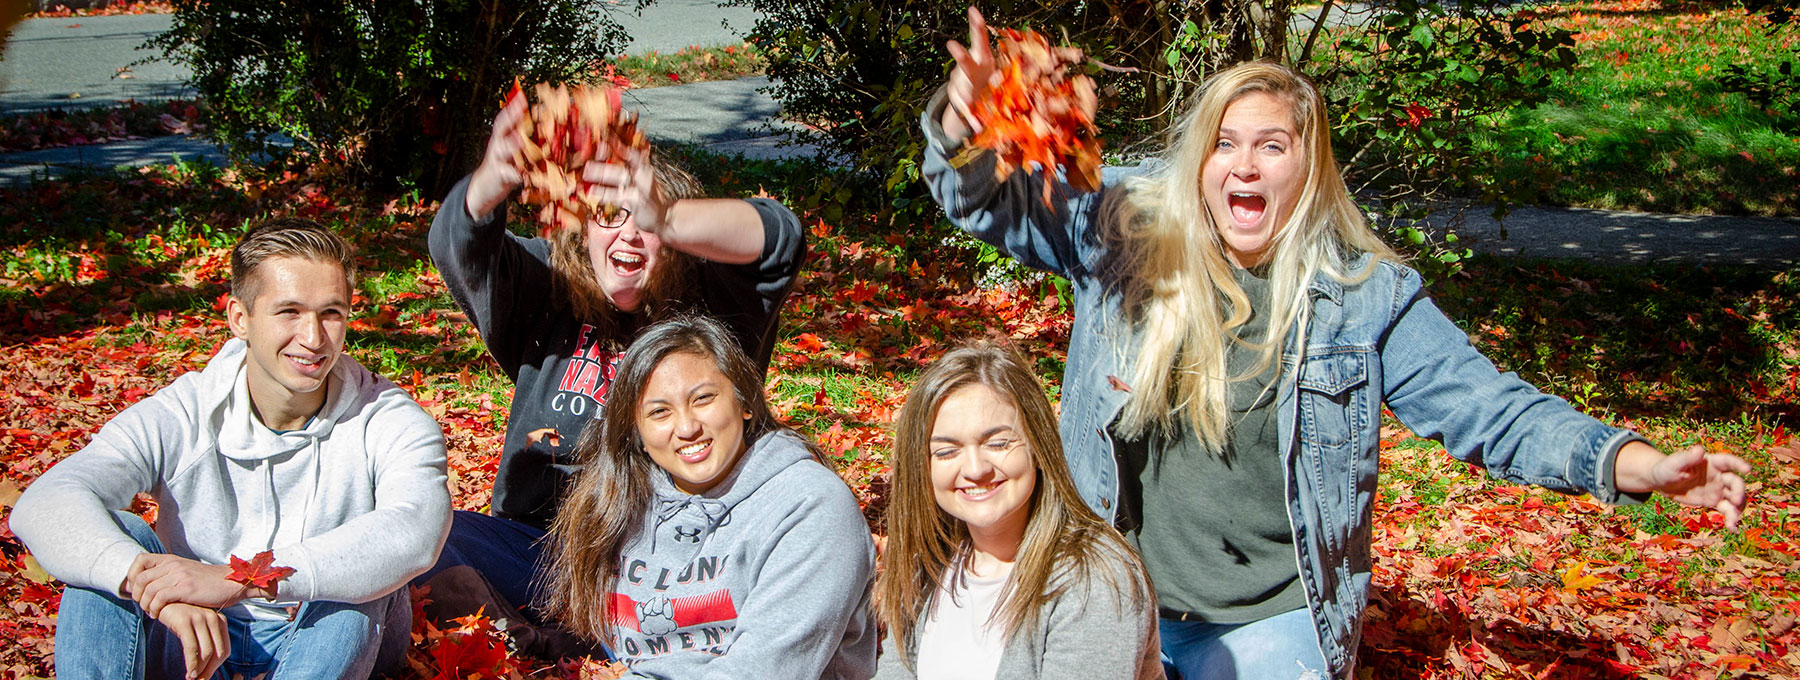 Admissions- students throwing leaves smiling